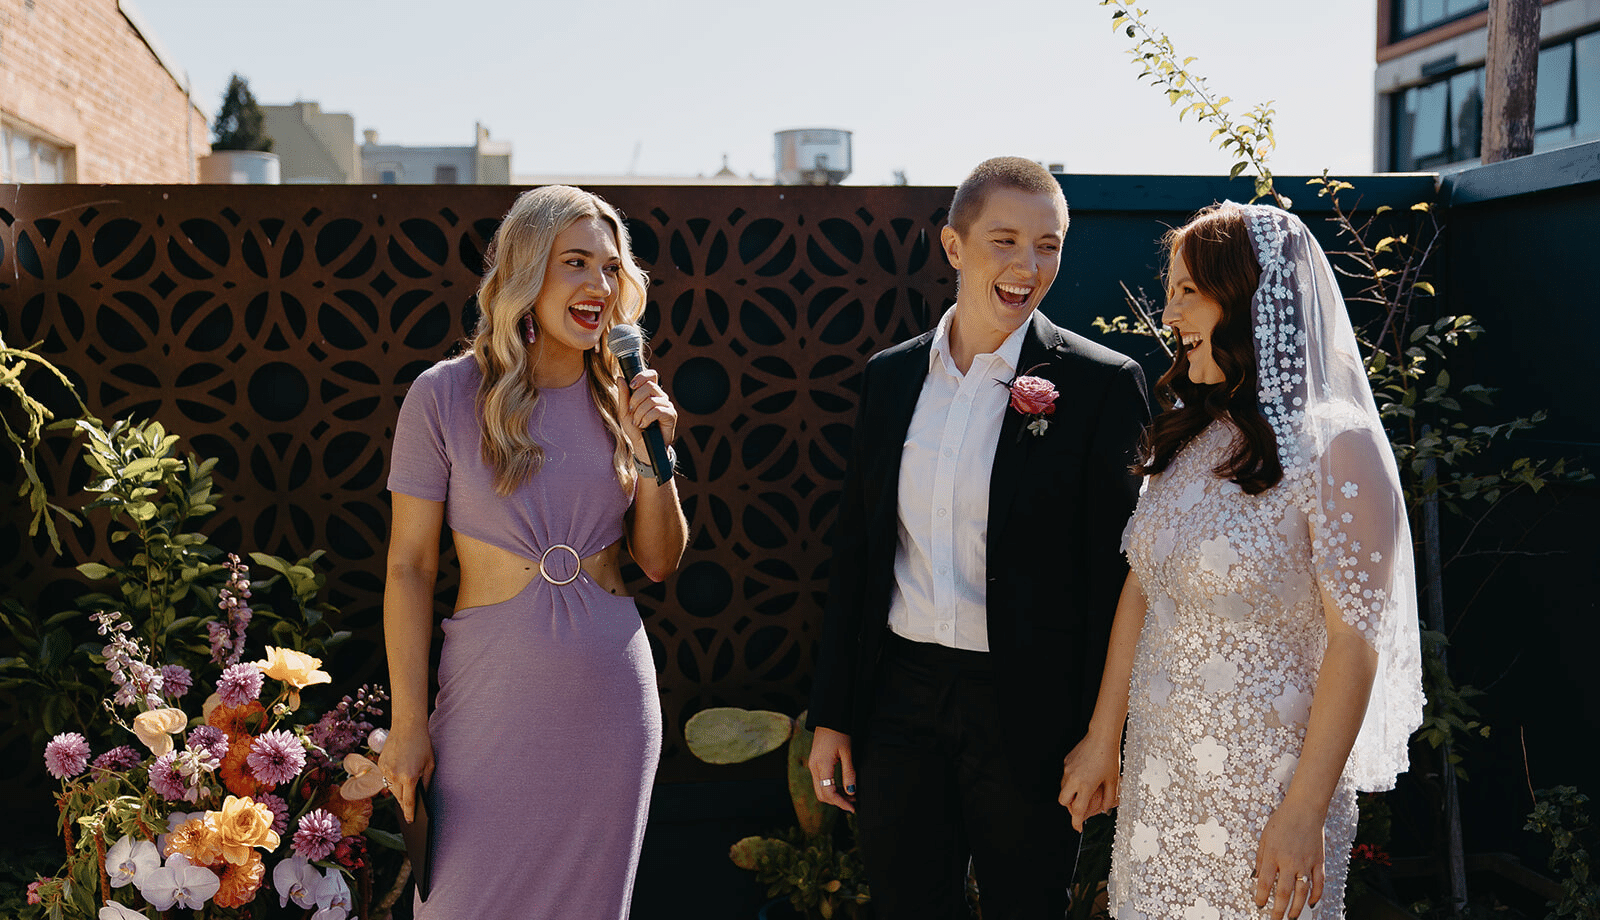 Aleks Mac Celebrant Marries Same Sex Couple in Brunswick Photographed by Lovegood Images